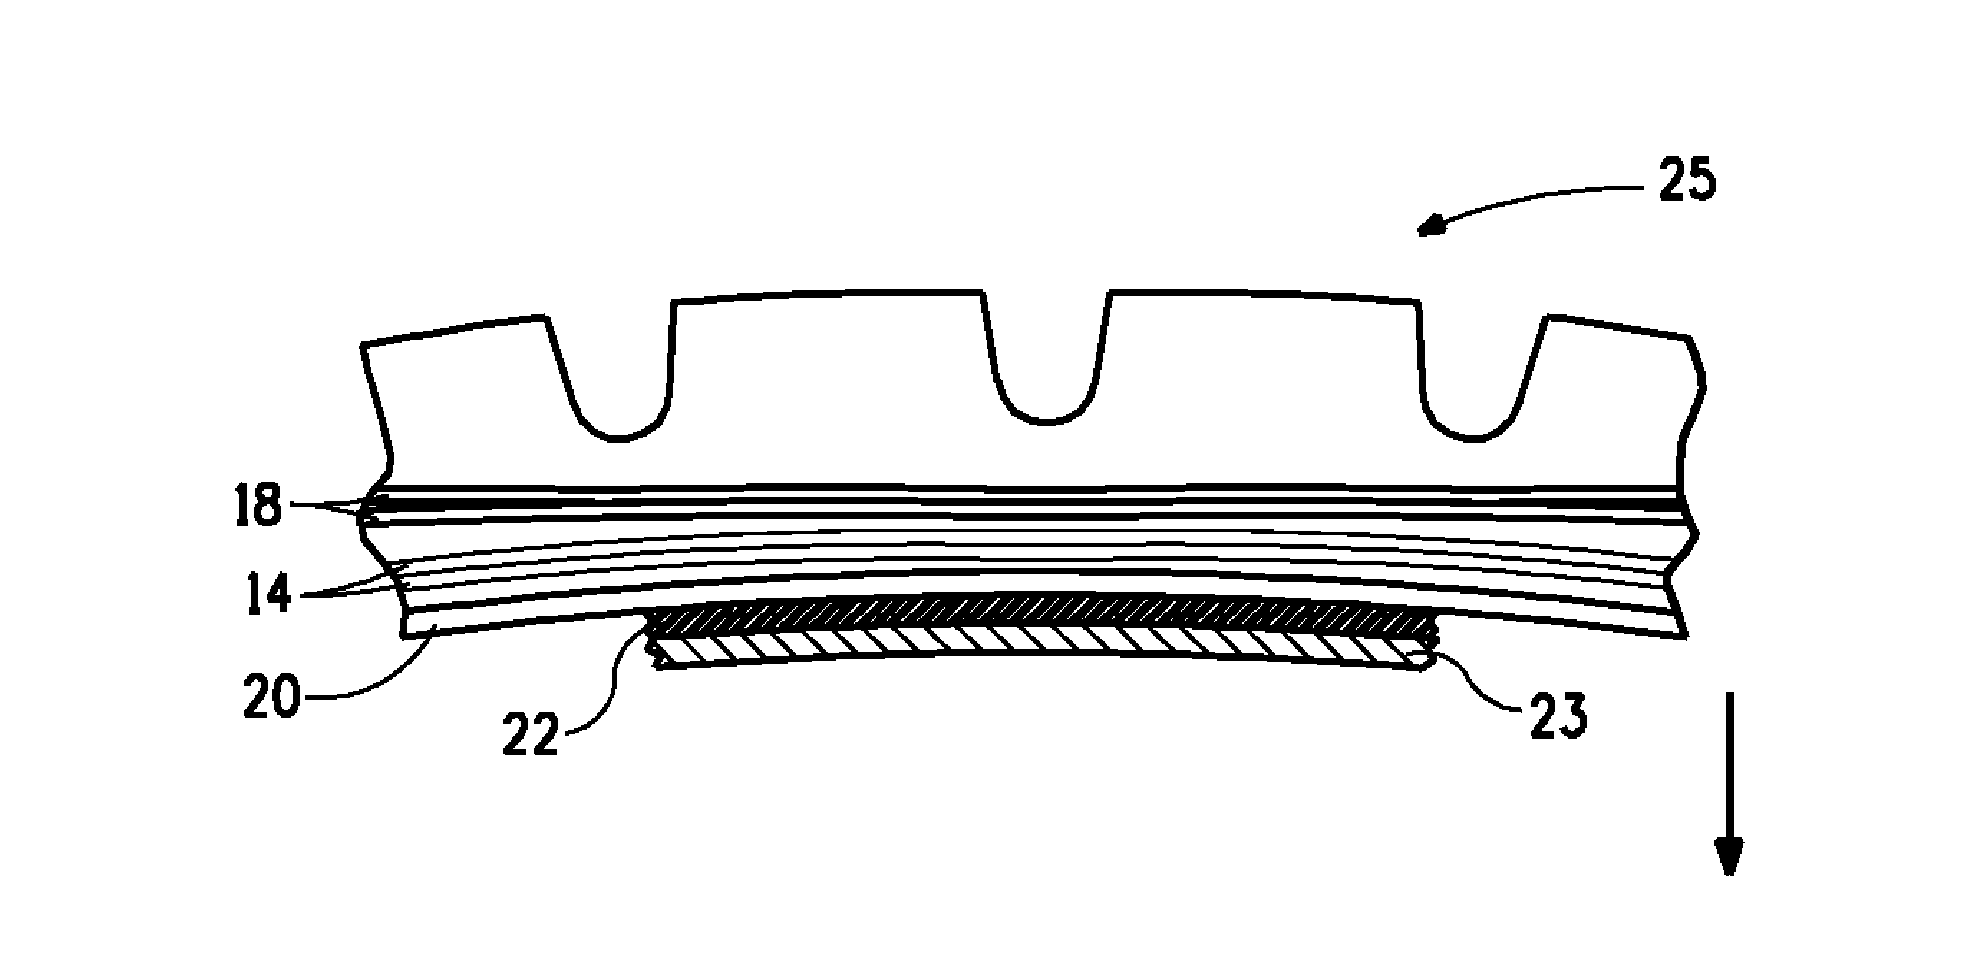 Tire containing a component for reducing vibration-generated noise in a tire and method for reducing tire noise